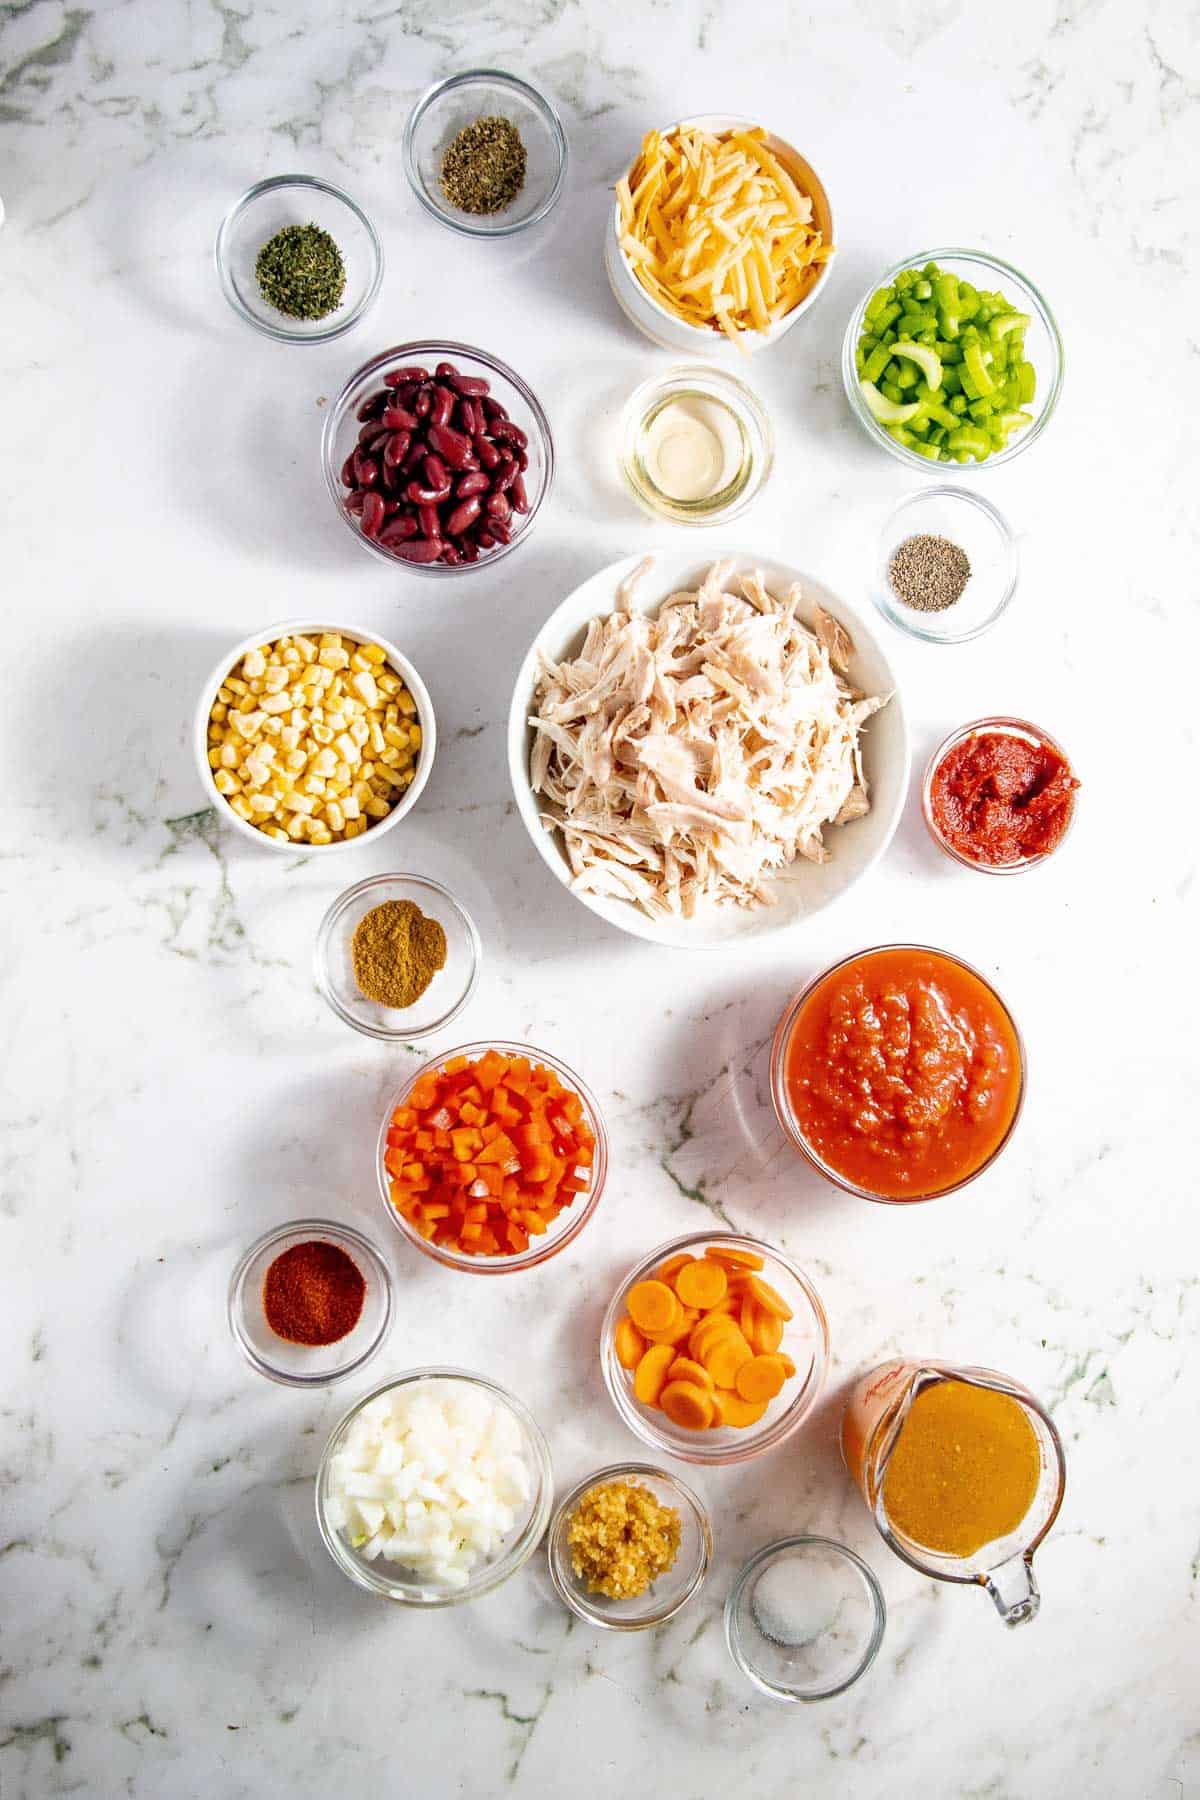 The ingredients for a chicken fajita bowl.